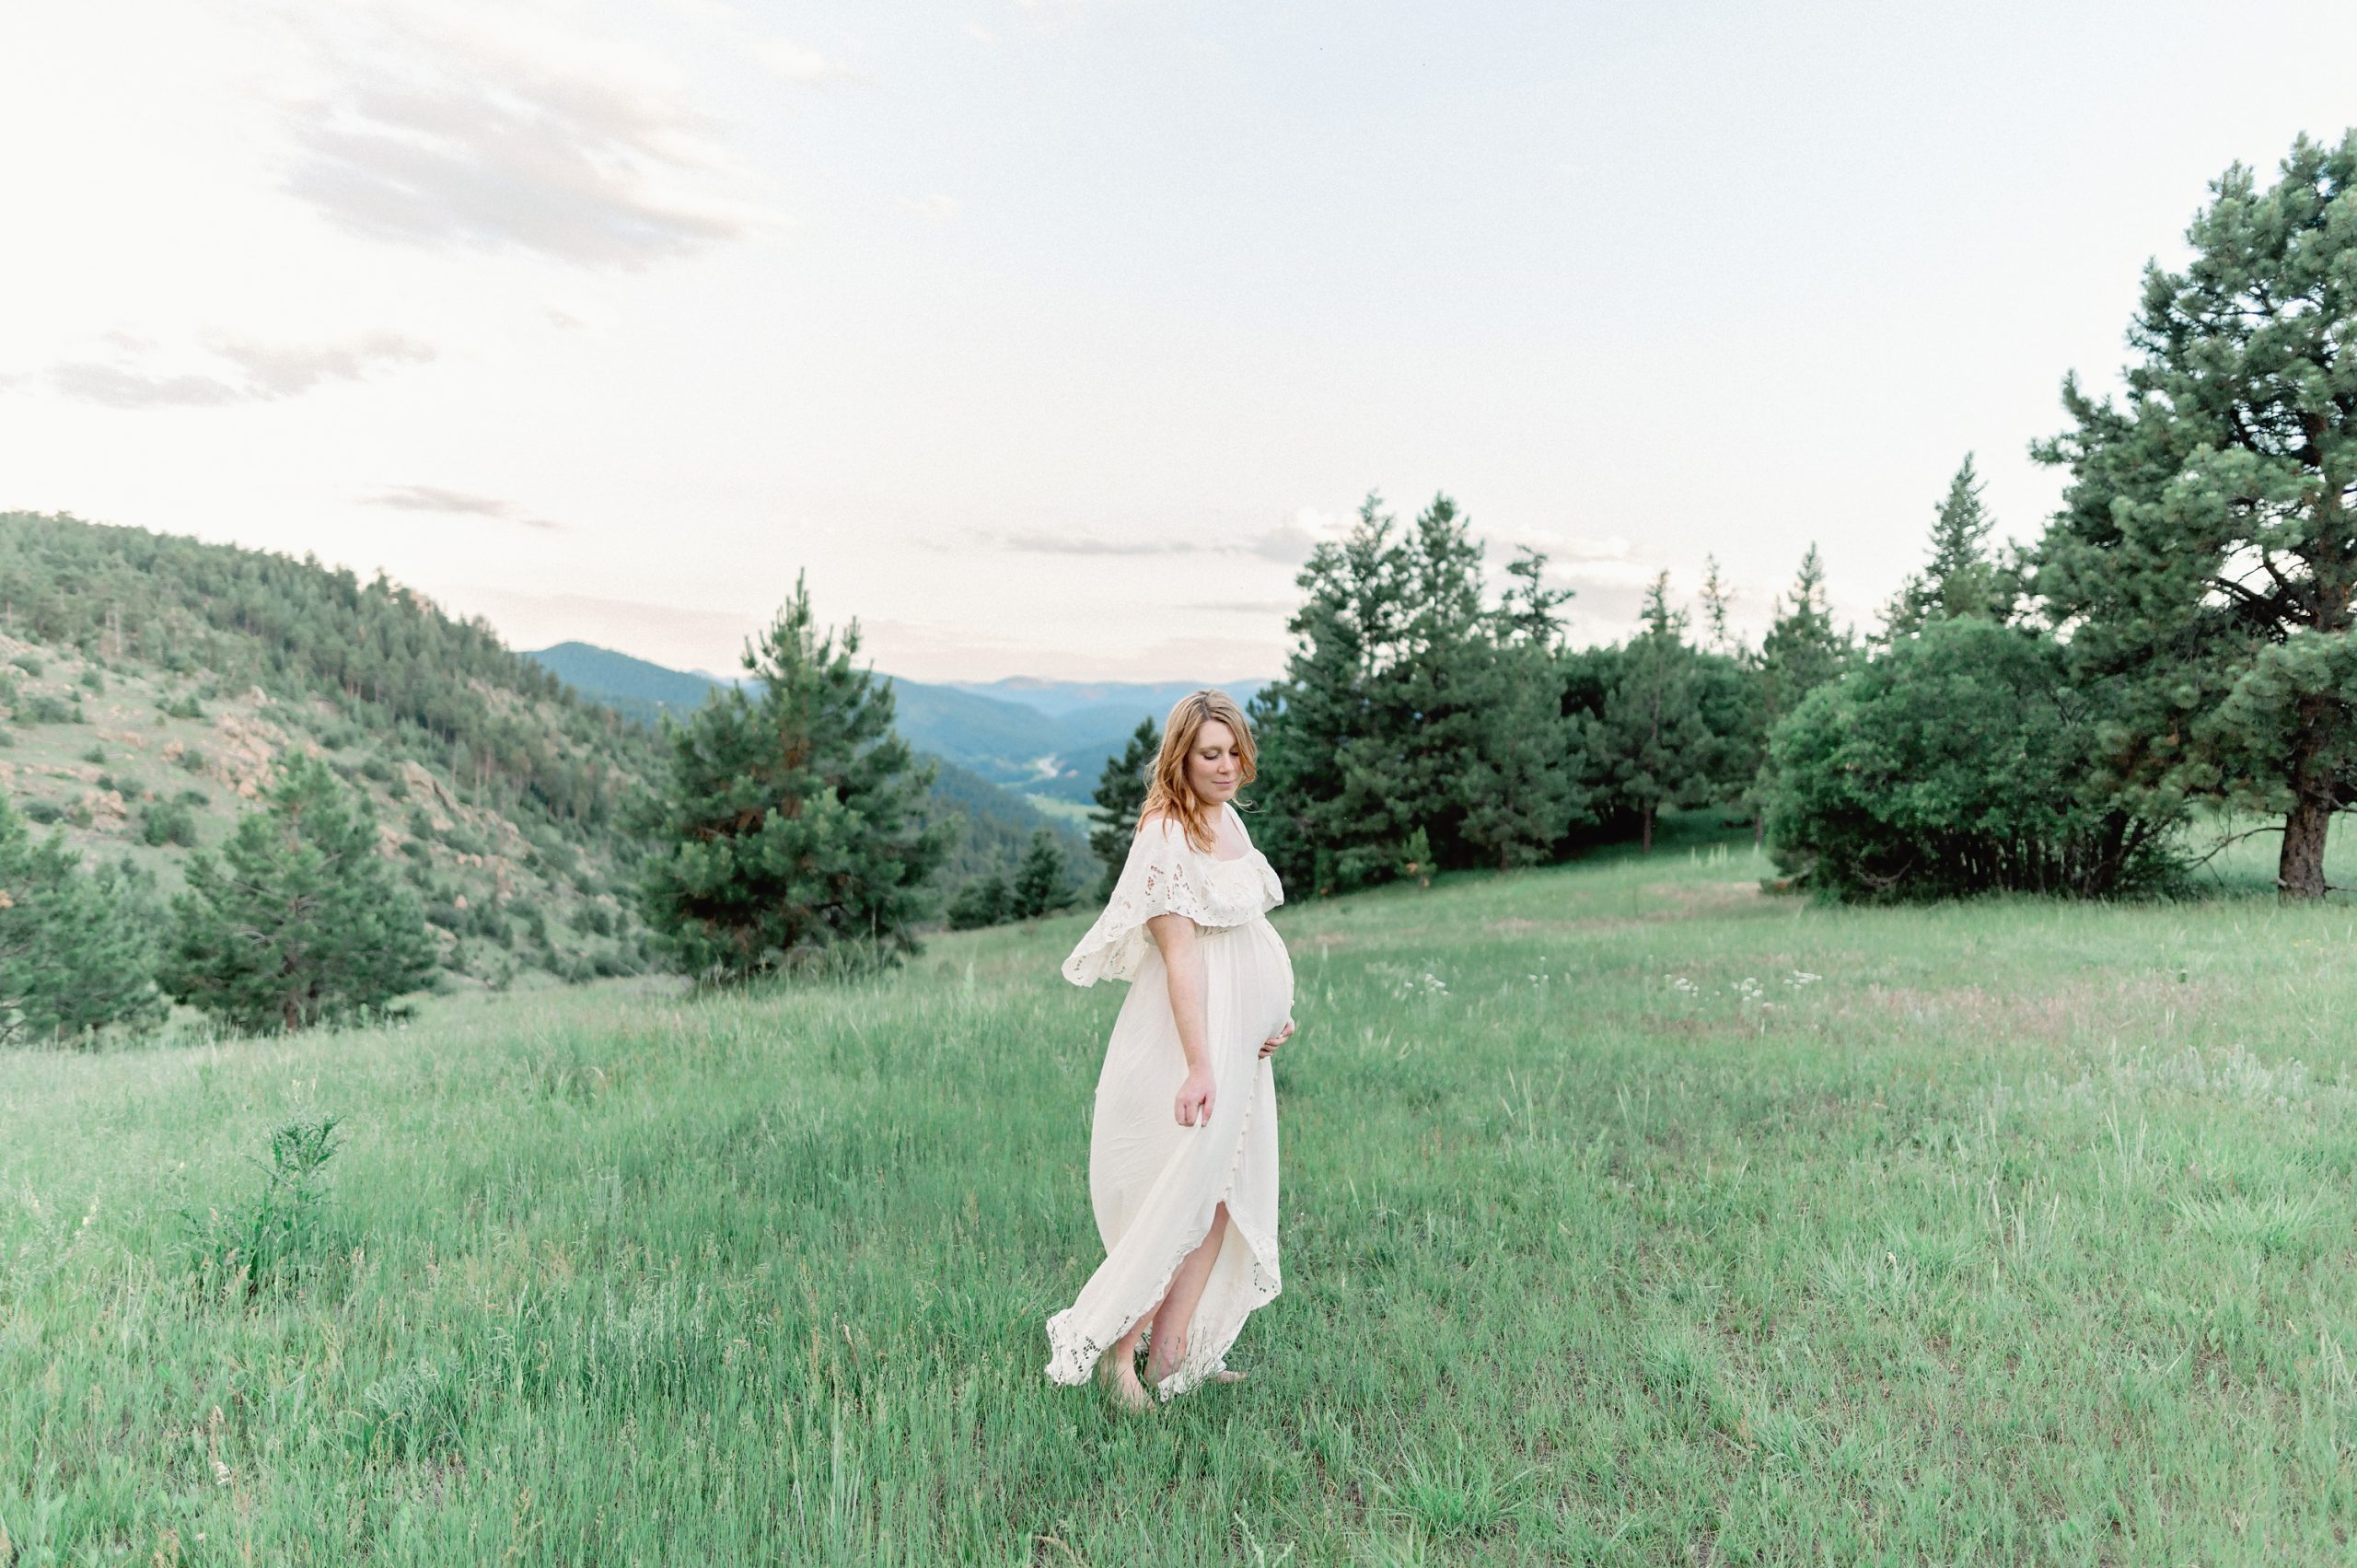 A sweet young couple expecting their first baby gets maternity photos done with the stunning backdrop of Mount Falcon in Denver, Colorado.